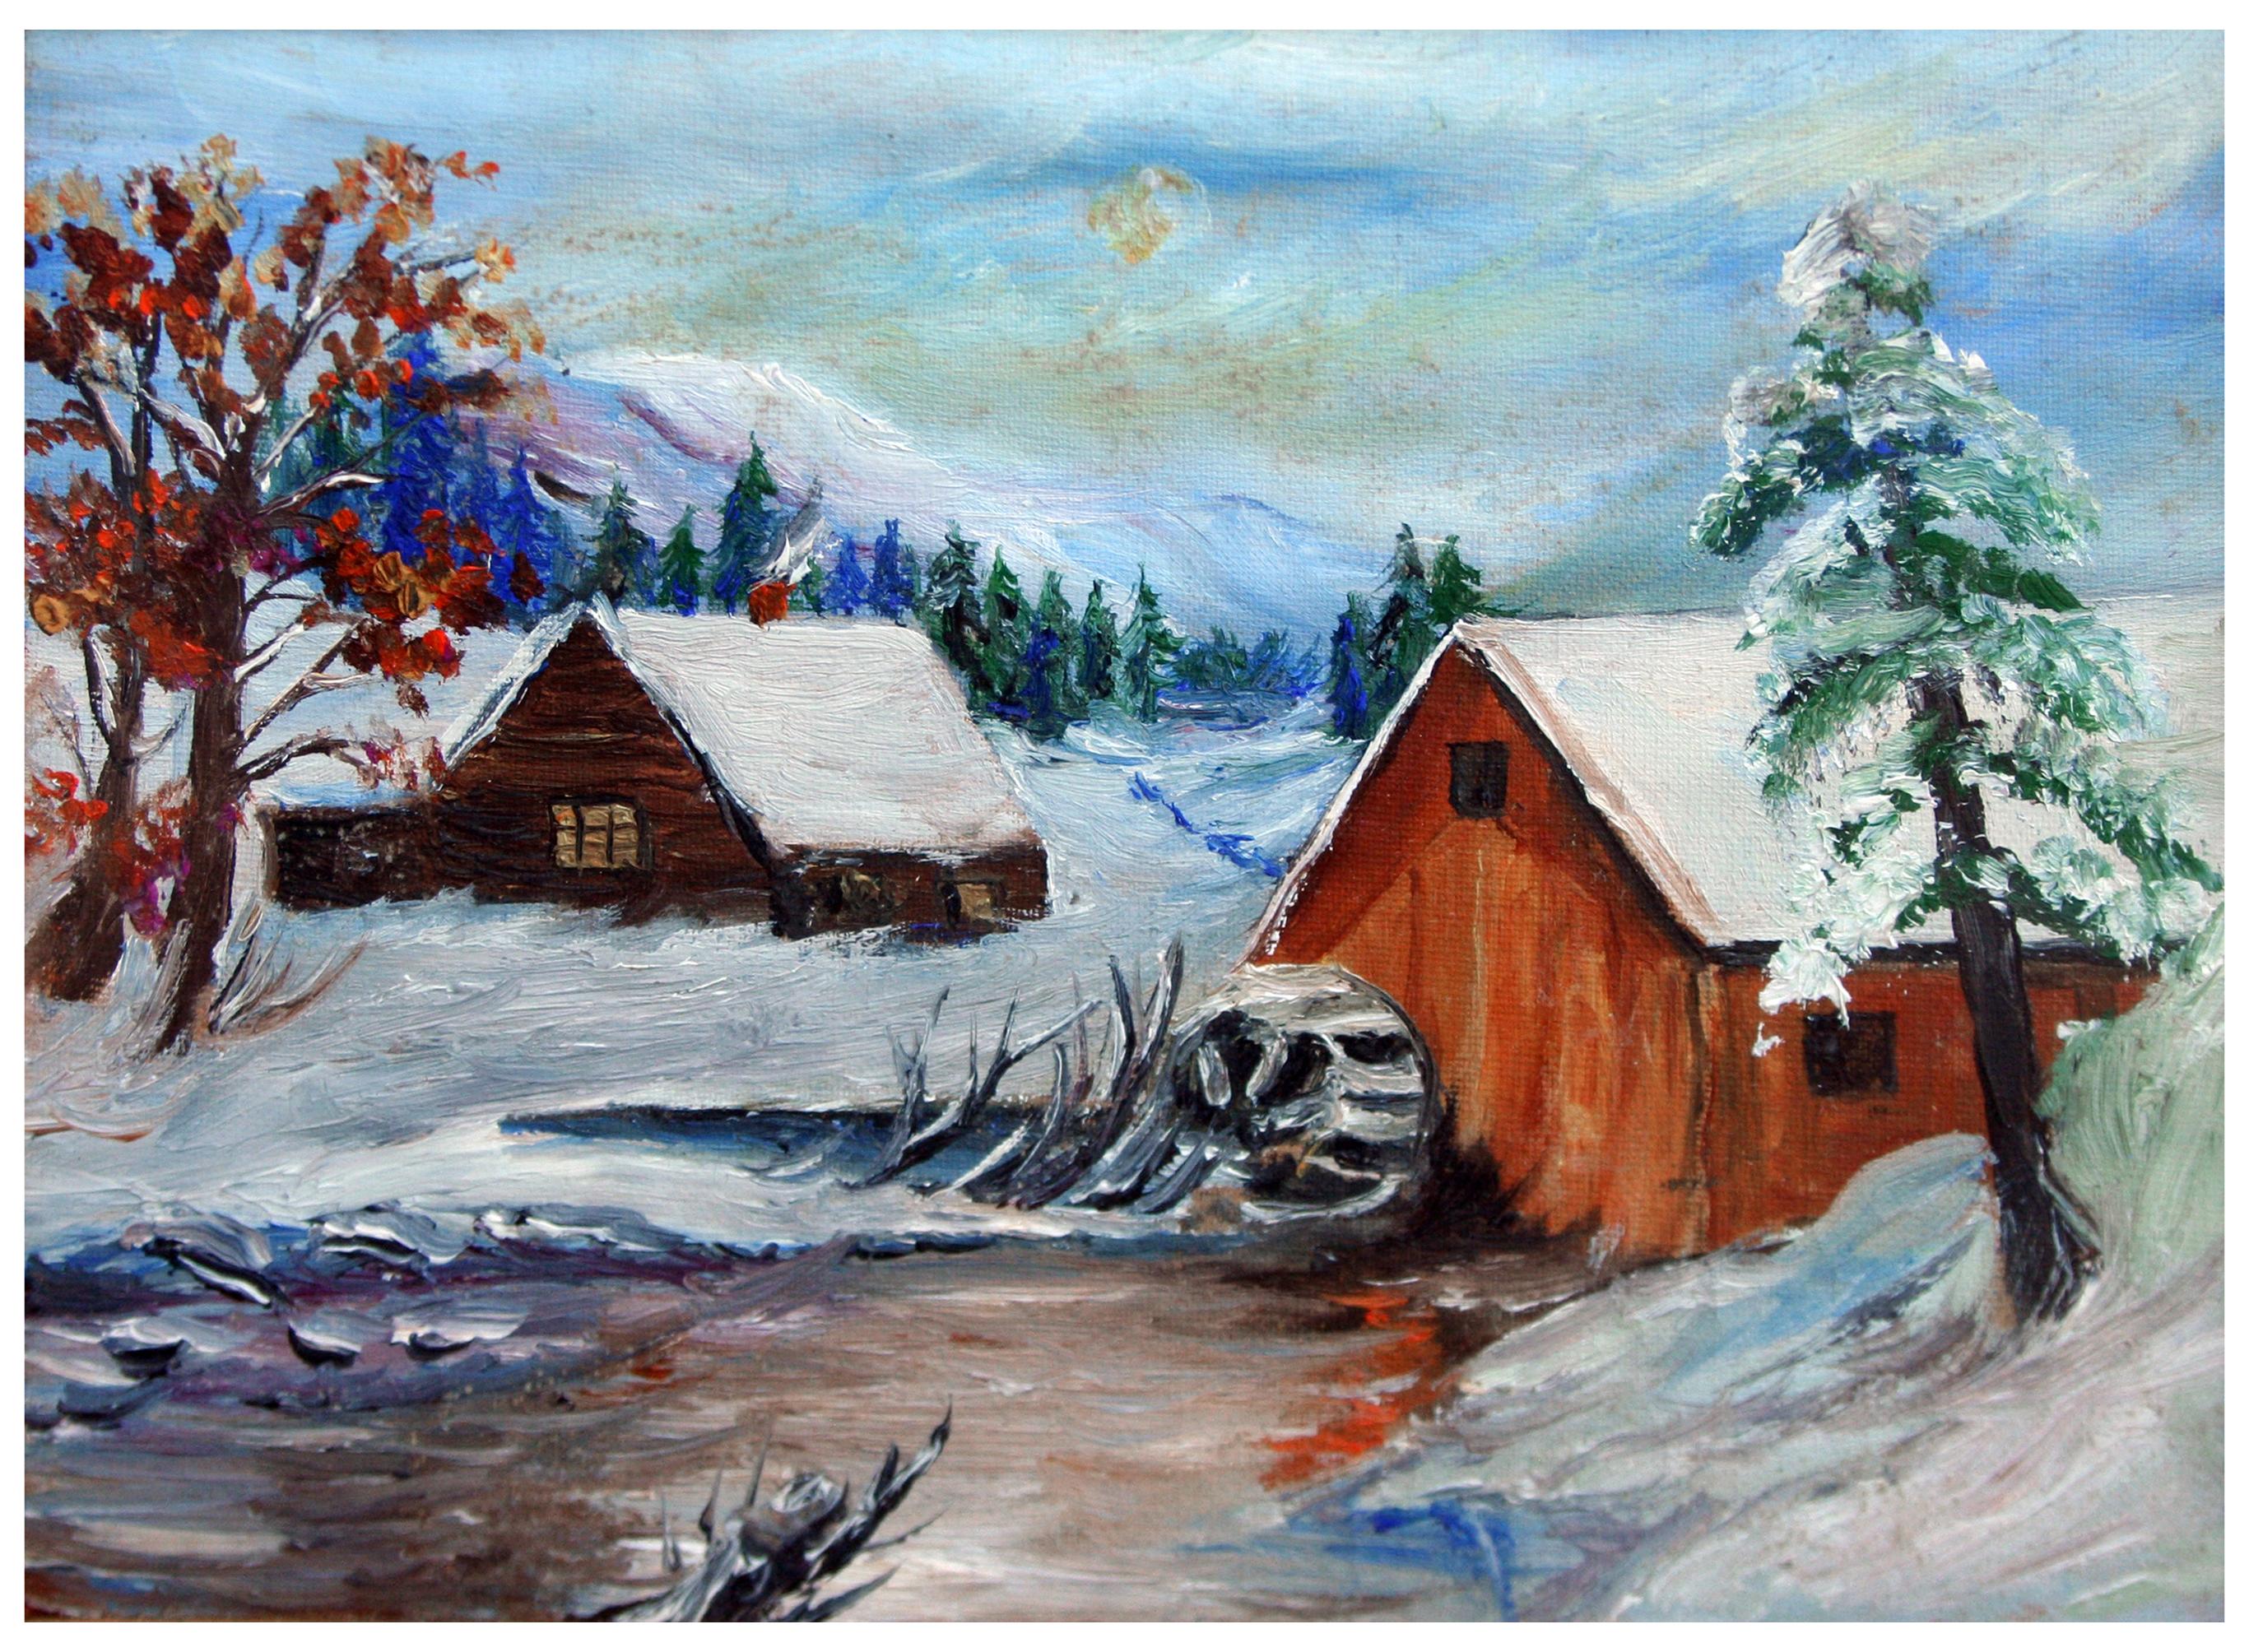 Grist Mill in the Snow - Winter Landscape - Painting by Unknown